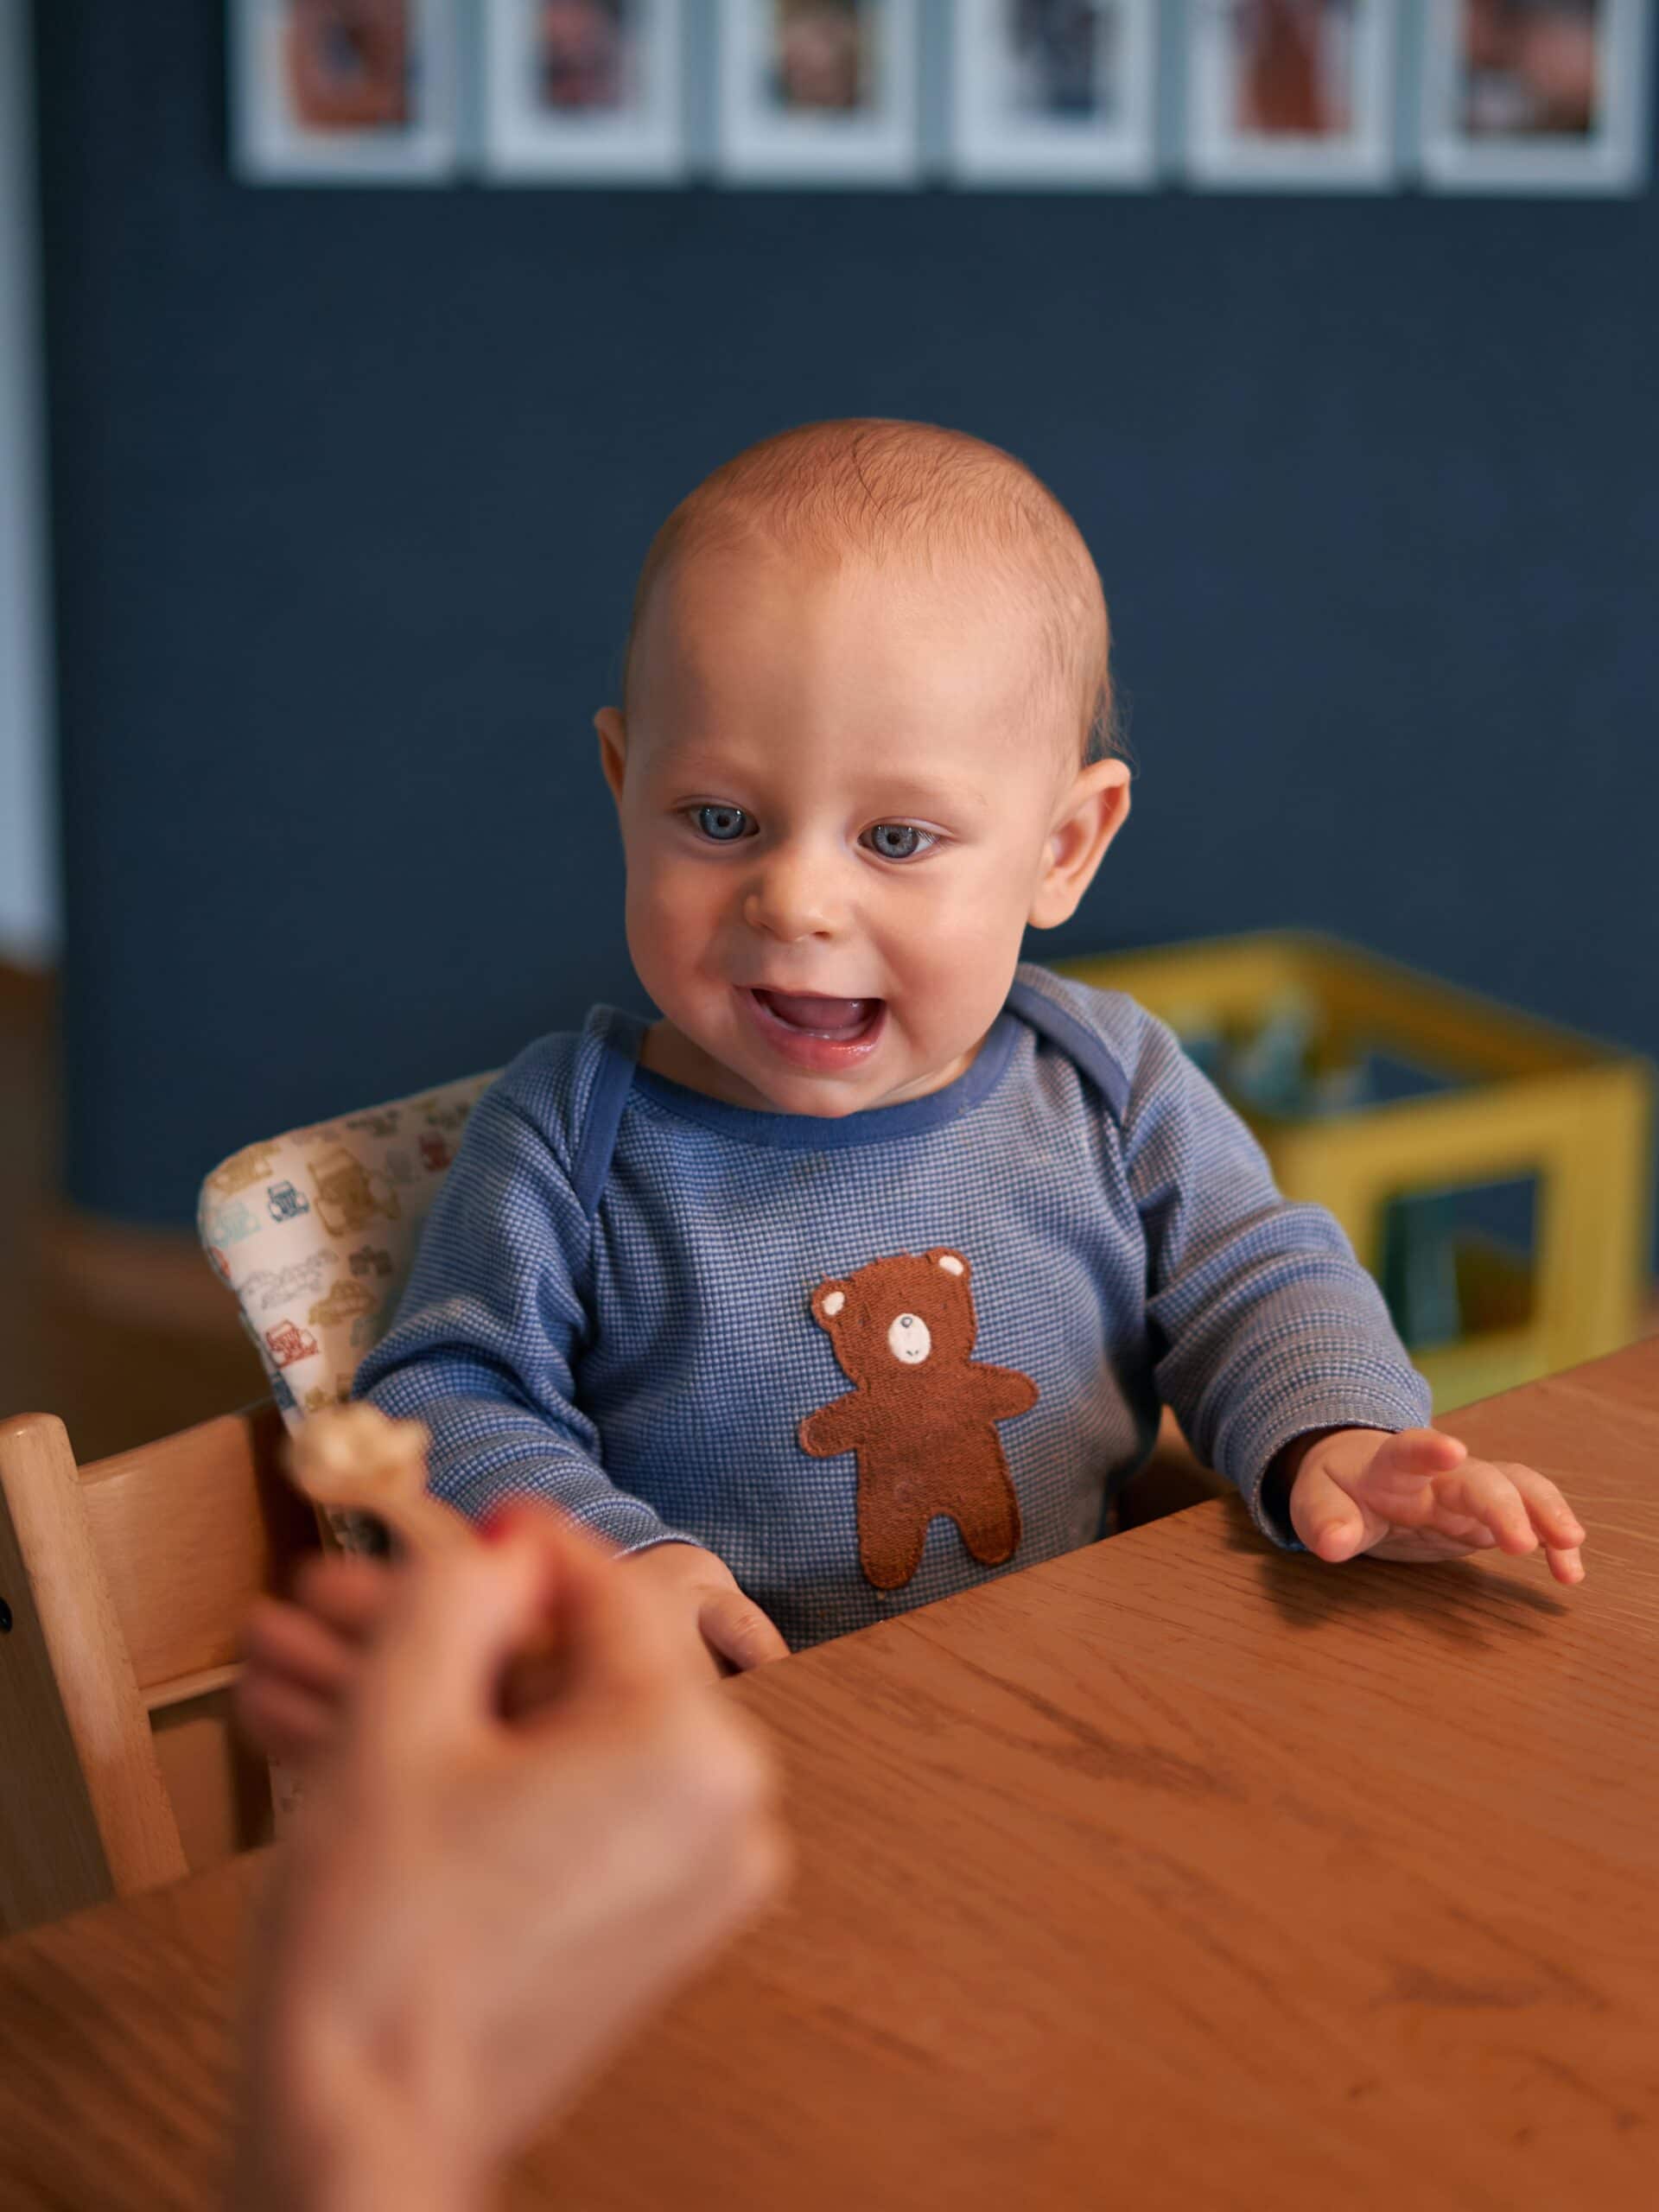 sitting baby looking and smiling at food